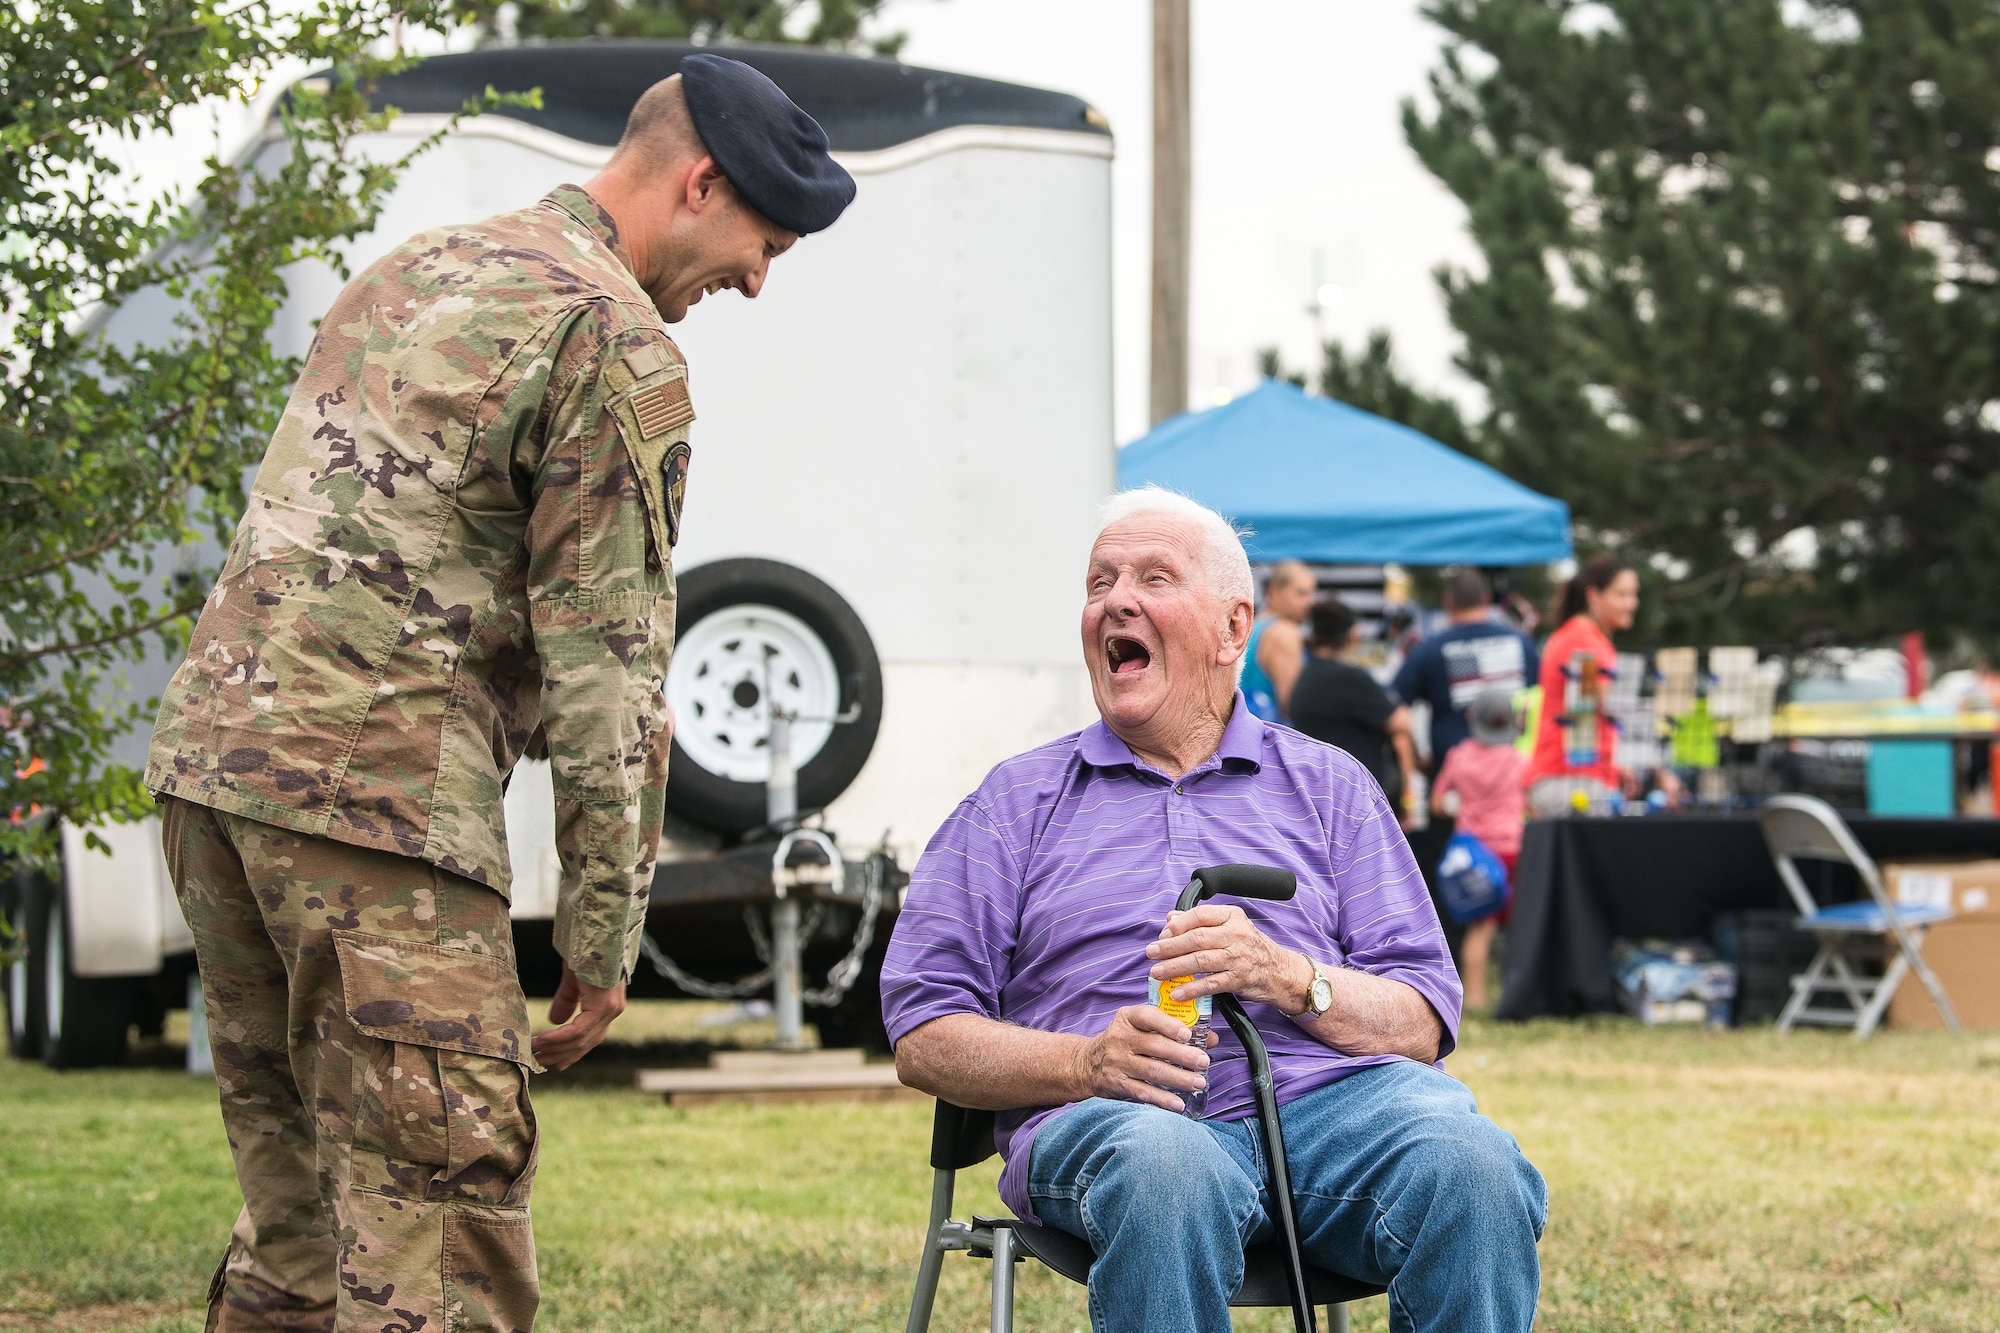 Tech. Sgt. Timothy Norwood, 27th Special Operations Security Forces Squadron kennel master, speaks with a community member during the National Night Out in Clovis, N.M, August 6, 2019. The National Night Out strengthened relationships with law enforcement in the community, including those stationed at Cannon Air Force Base. (U.S. Air Force photo by Senior Airman Vernon R. Walter III)